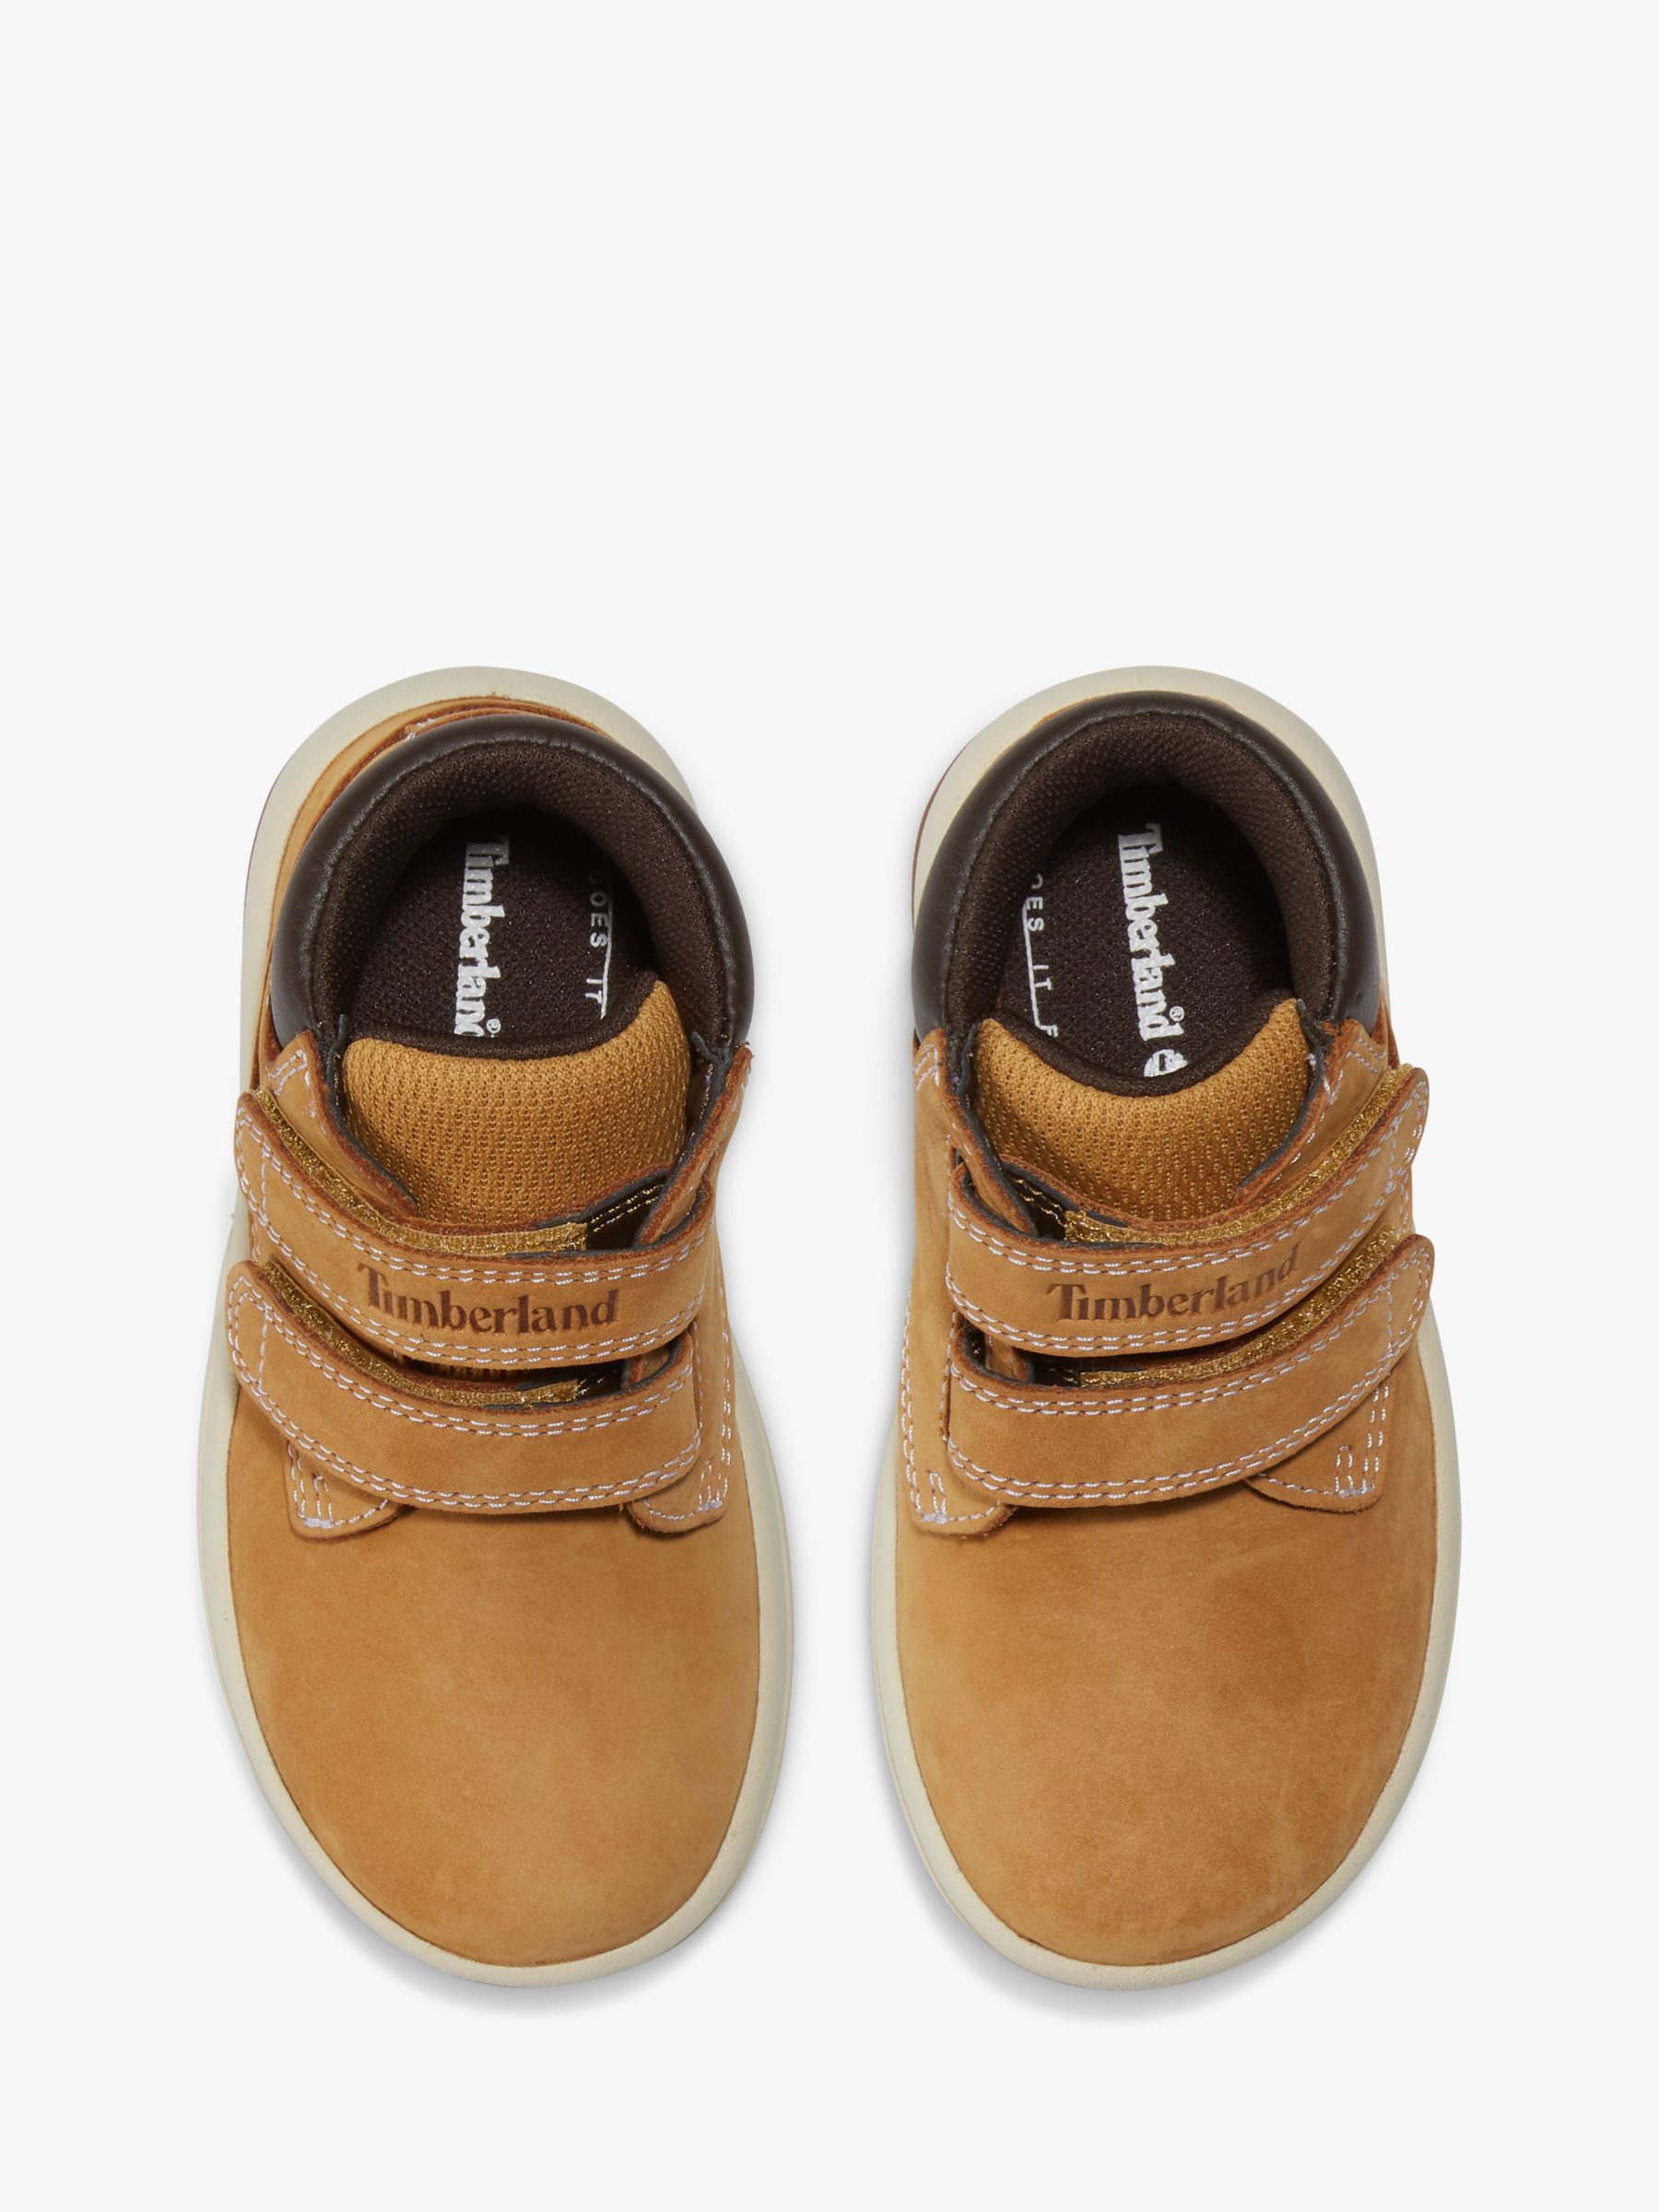 Timberland Kids' Toddle Tracks High Top Trainers, Wheat Nubuck, 21